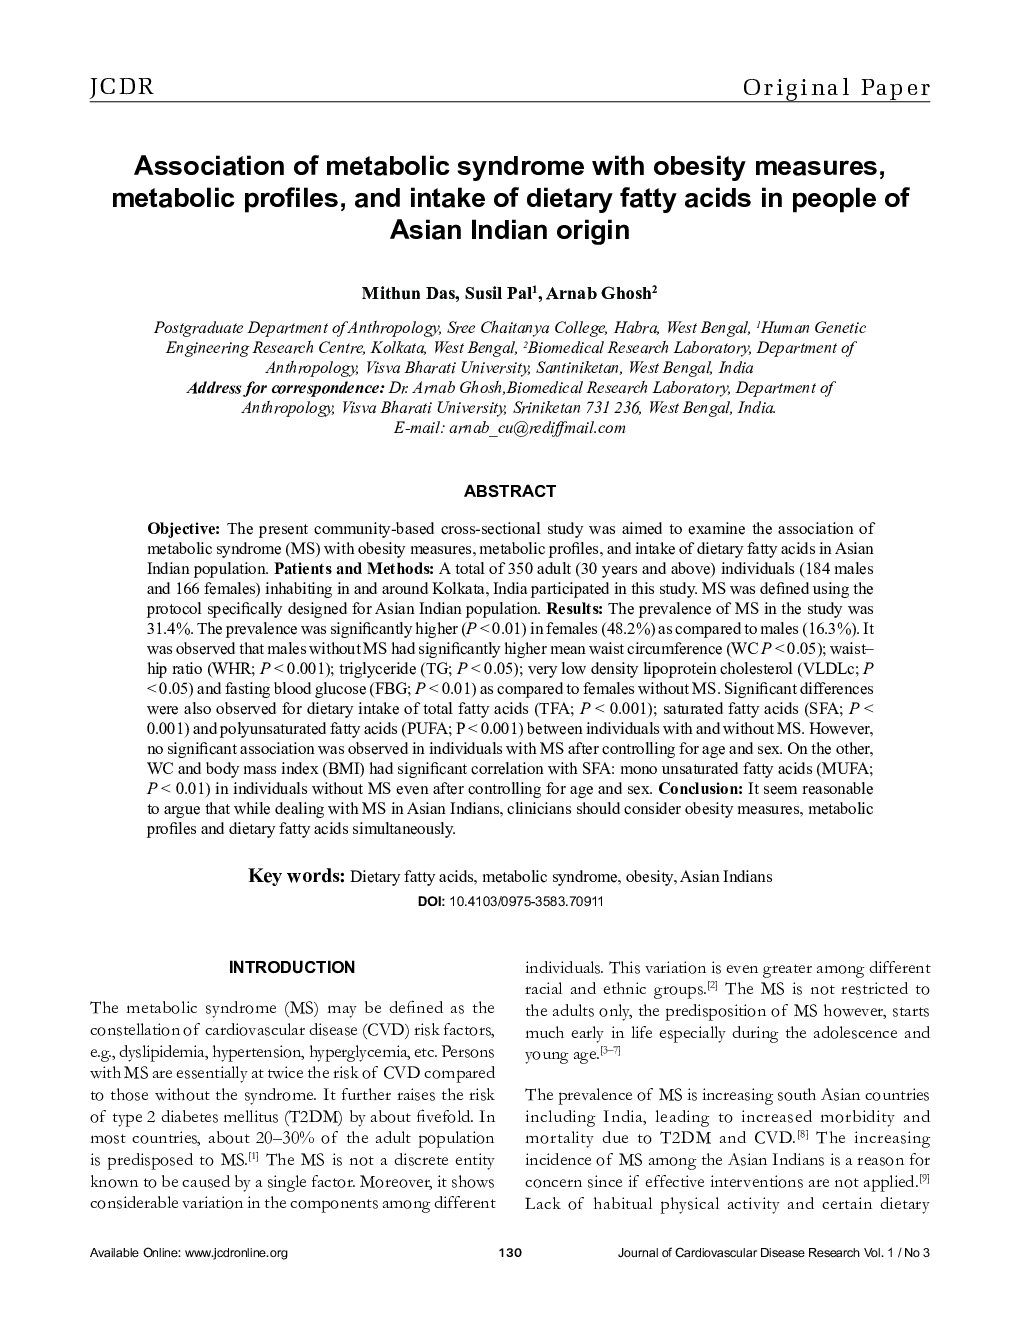 Association of metabolic syndrome with obesity measures, metabolic profiles, and intake of dietary fatty acids in people of Asian Indian origin